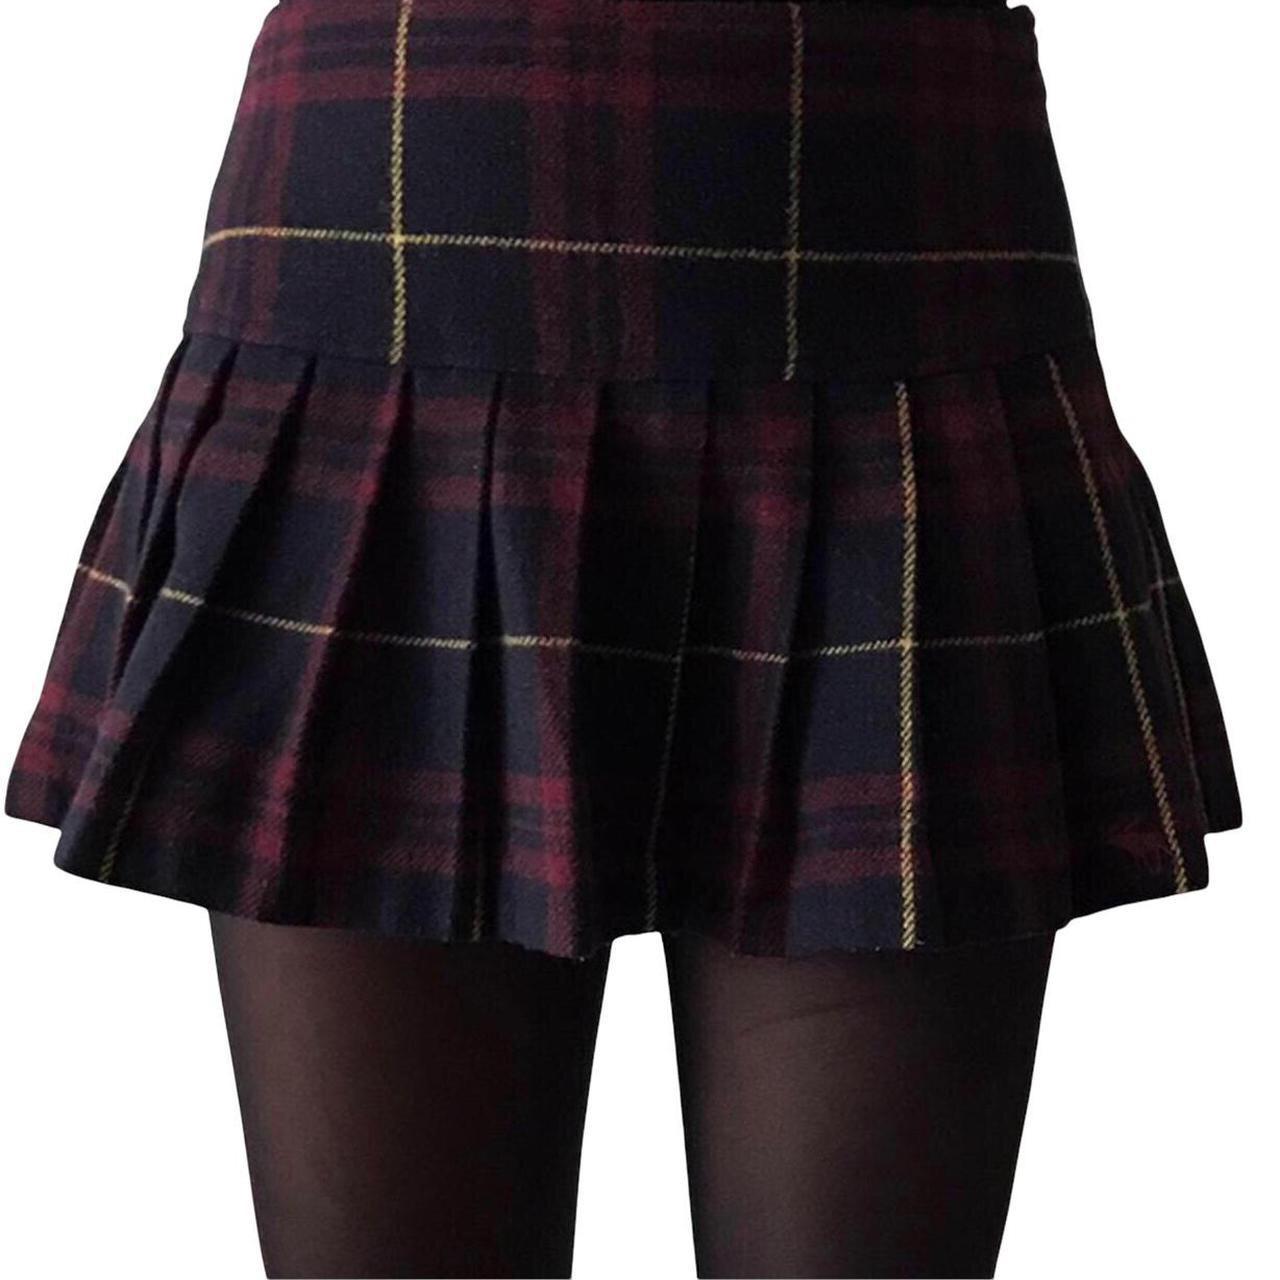 Product Image 1 - Abercrombie and Fitch plaid mini